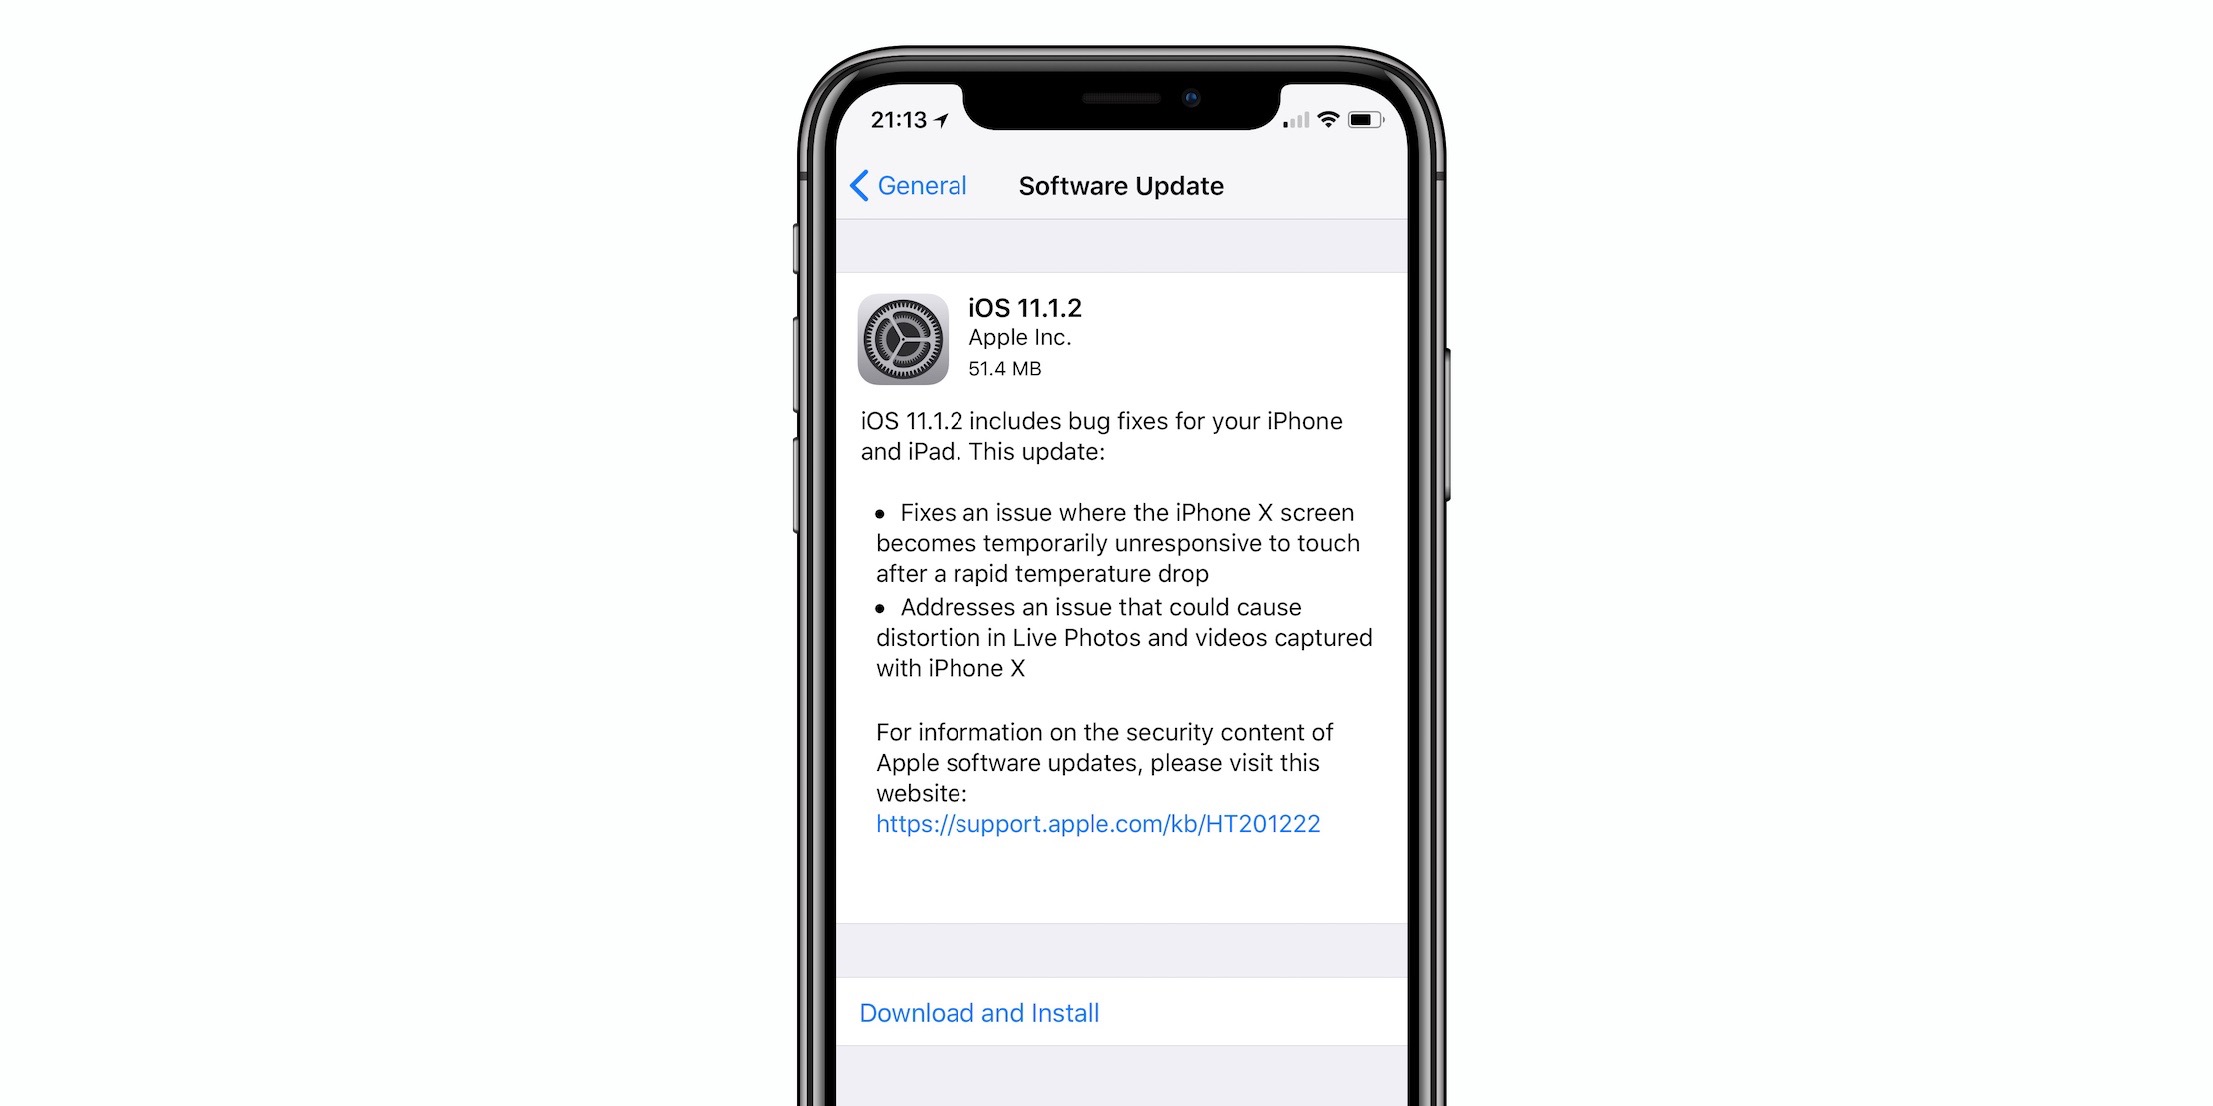 Apple Releases Ios 11 1 2 With Fix For Unresponsive Iphone X Screen At Cold Temperatures 9to5mac